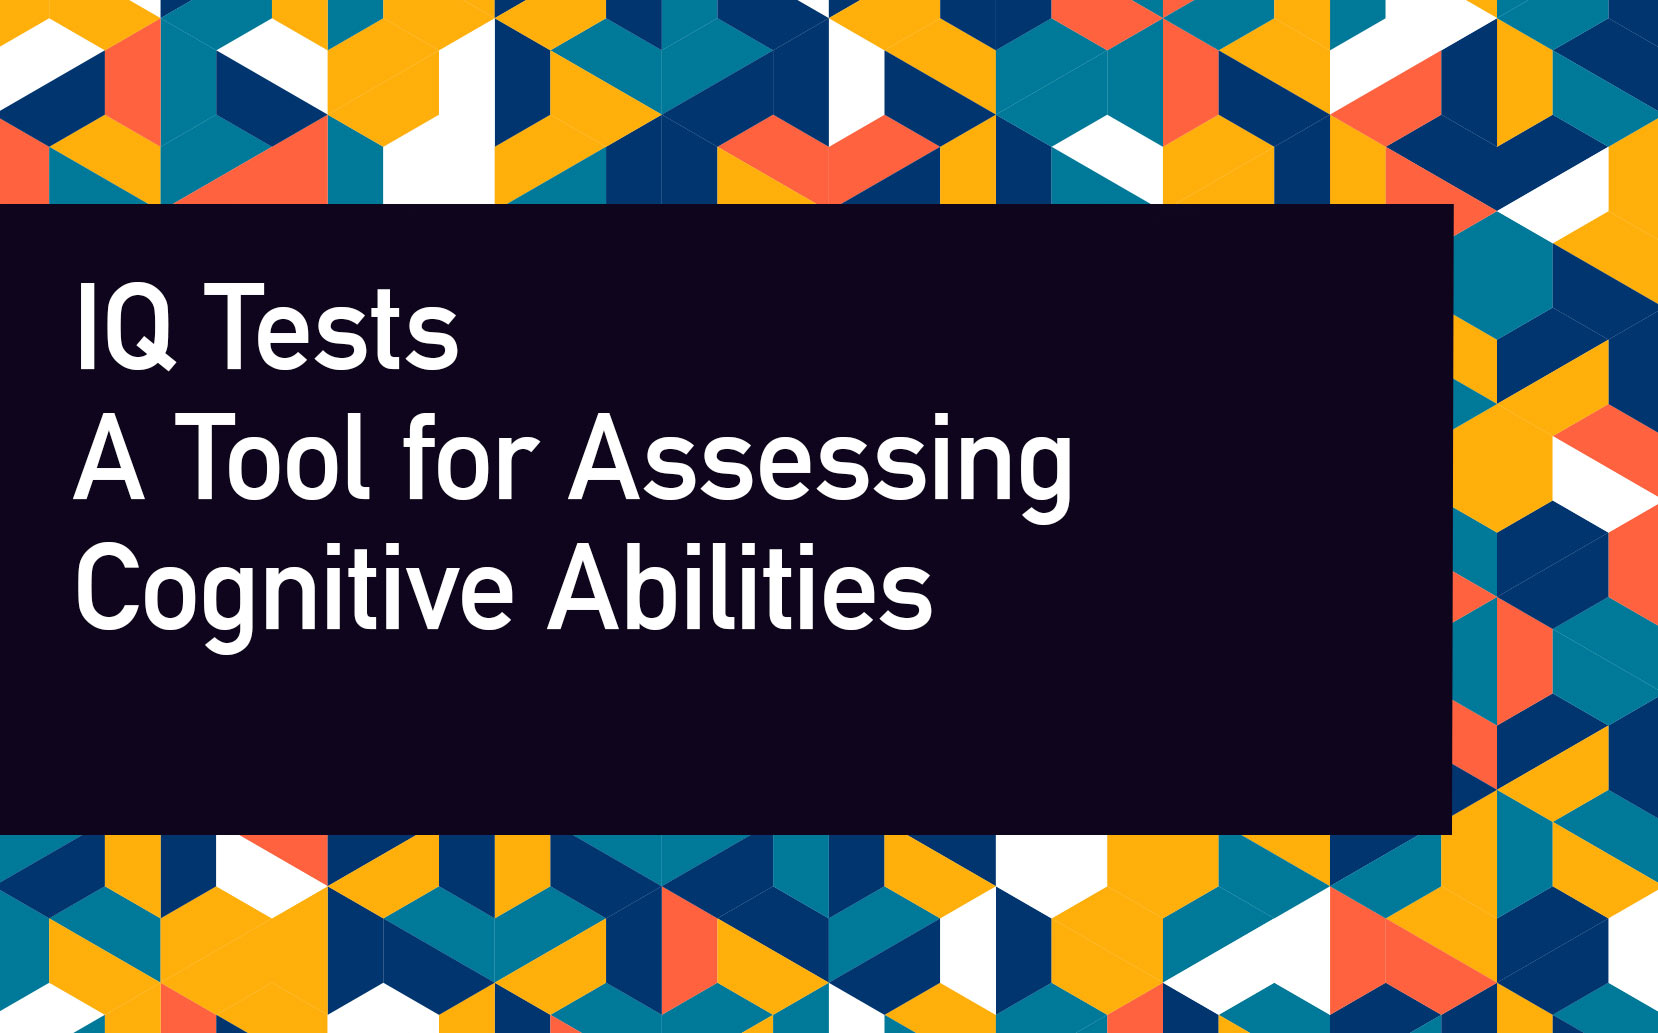 IQ Tests: A Tool for Assessing Cognitive Abilities